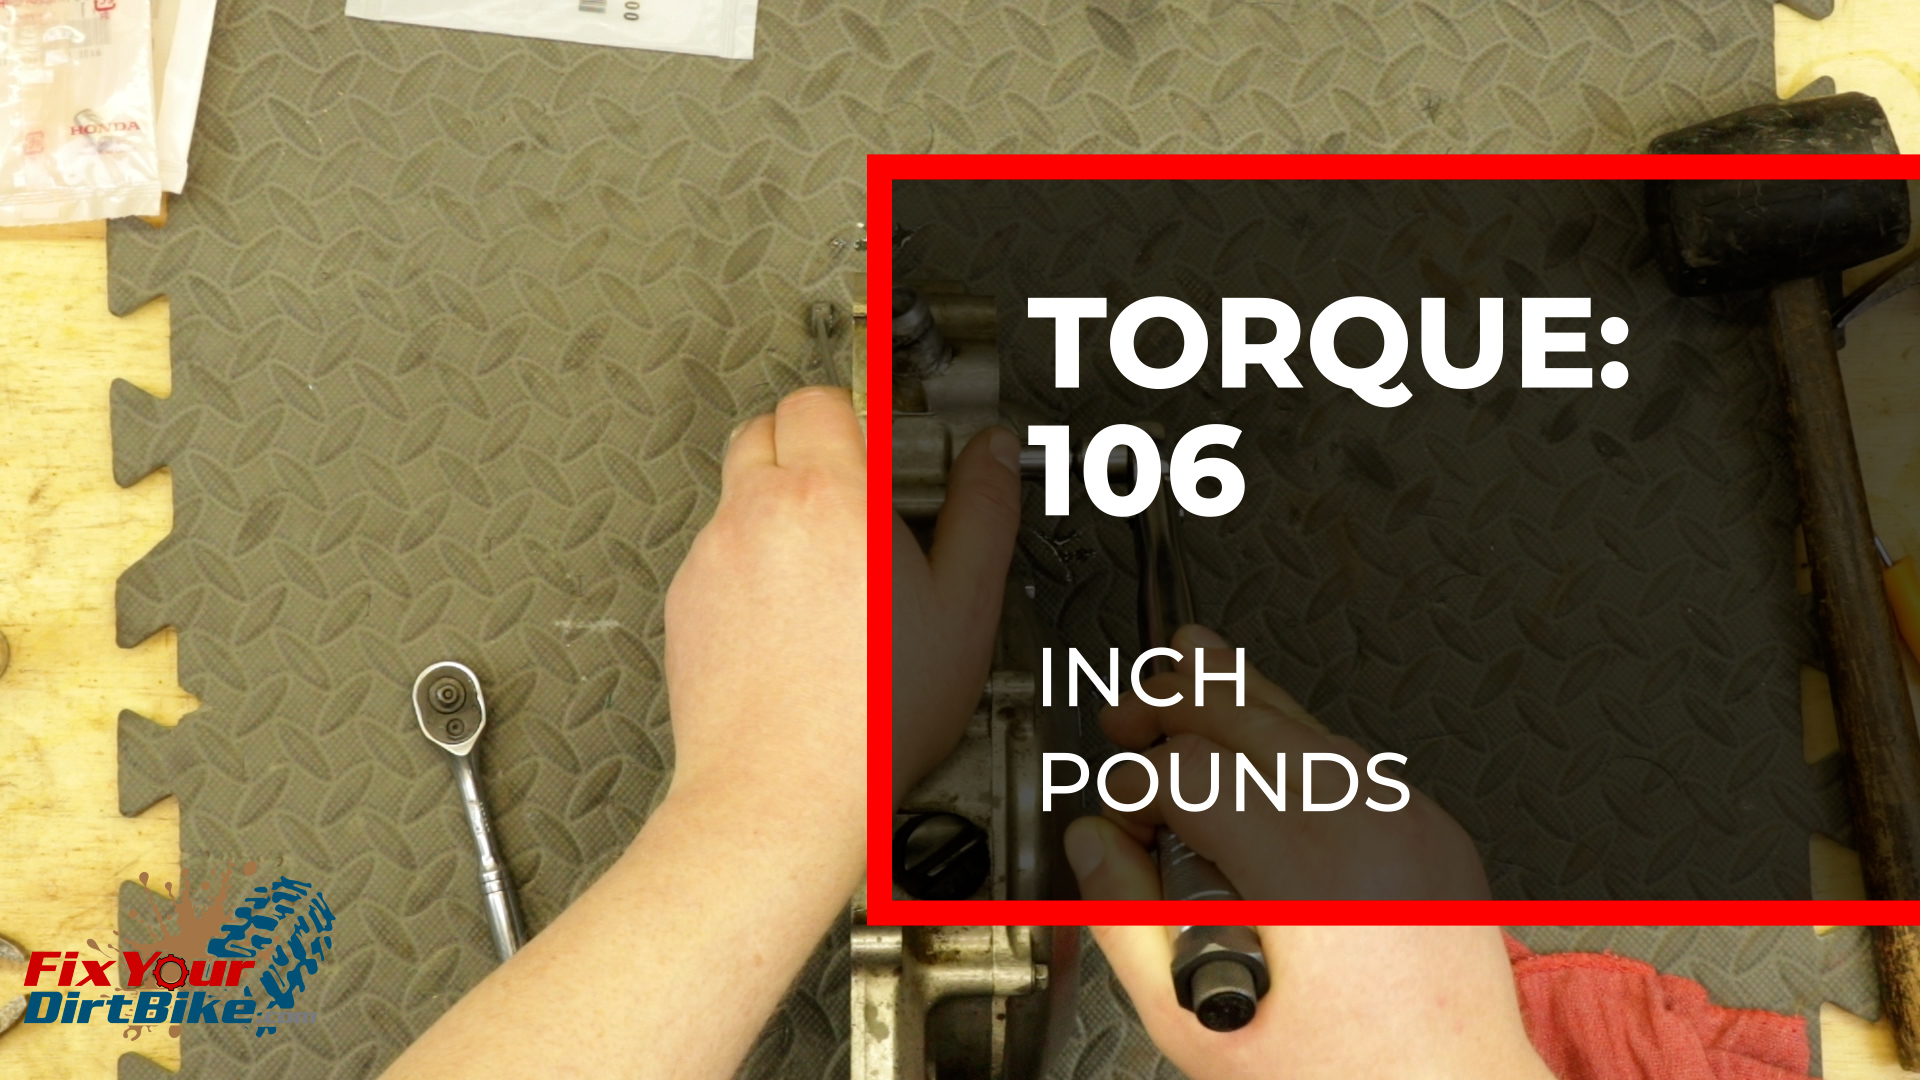 24 - Torque The Impeller To 106 Inch Pounds